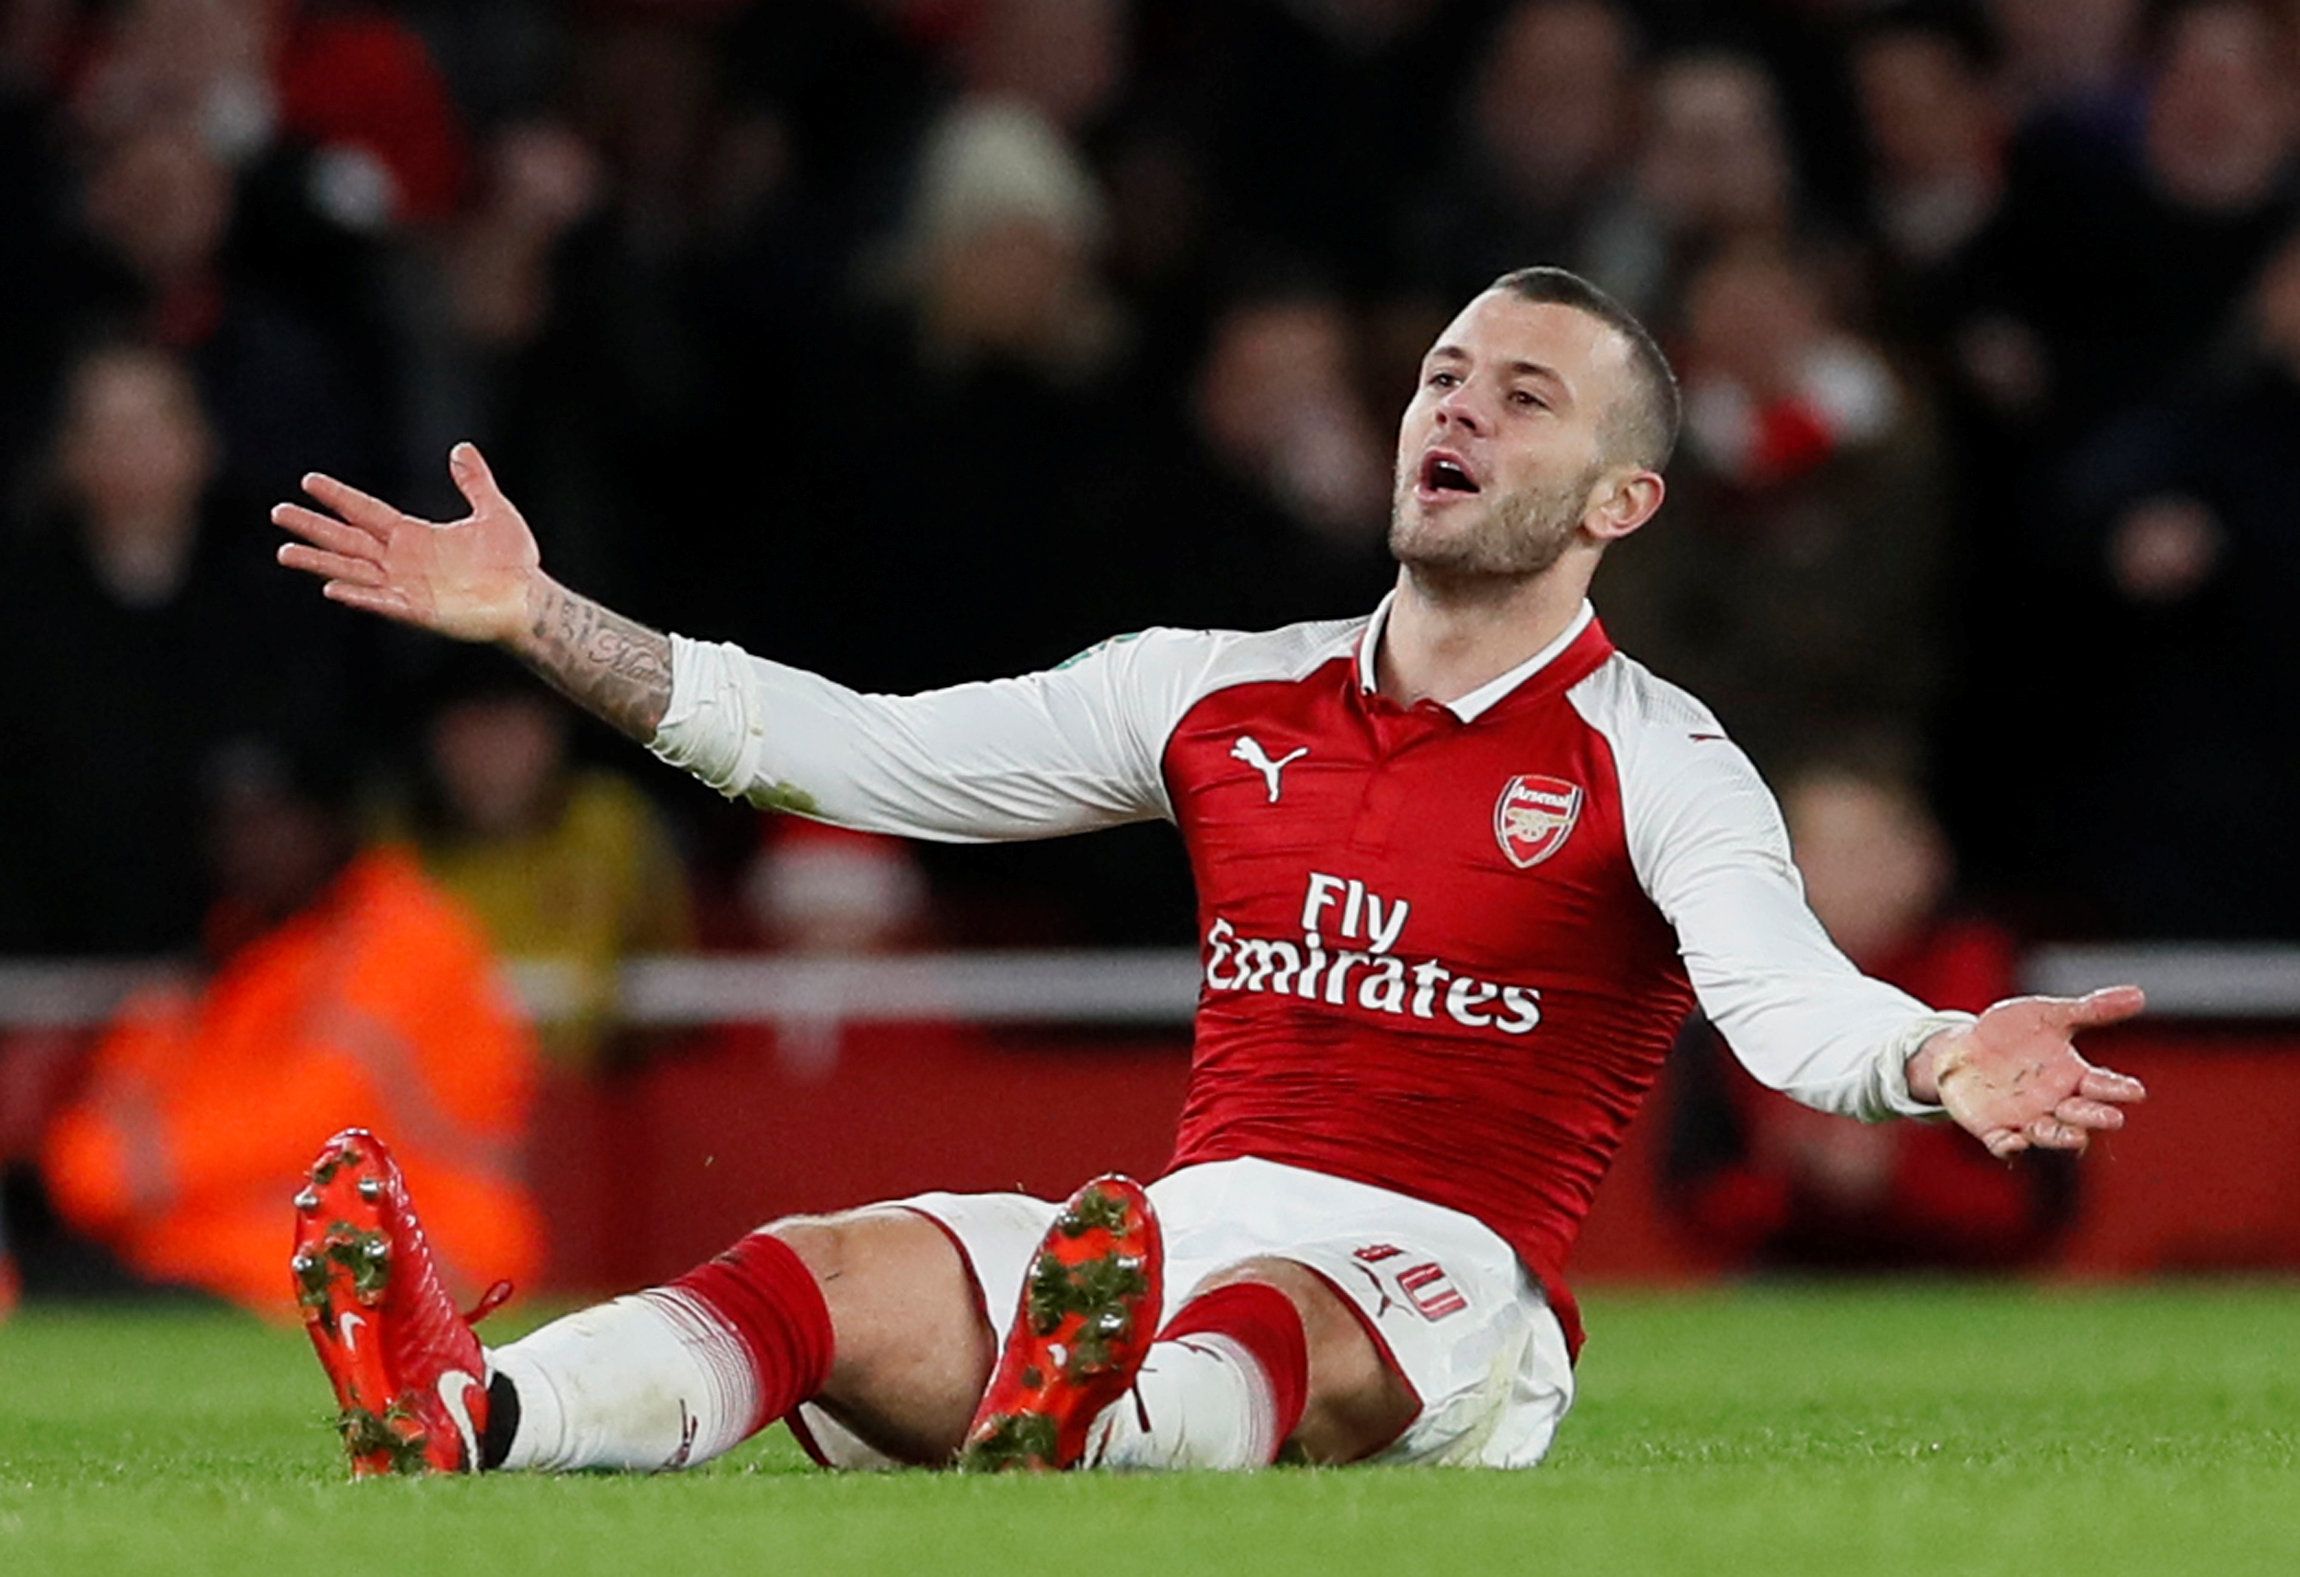 Soccer Football - Carabao Cup Semi Final Second Leg - Arsenal vs Chelsea - Emirates Stadium, London, Britain - January 24, 2018   Arsenal's Jack Wilshere reacts   REUTERS/David Klein    EDITORIAL USE ONLY. No use with unauthorized audio, video, data, fixture lists, club/league logos or "live" services. Online in-match use limited to 75 images, no video emulation. No use in betting, games or single club/league/player publications. Please contact your account representative for further details.